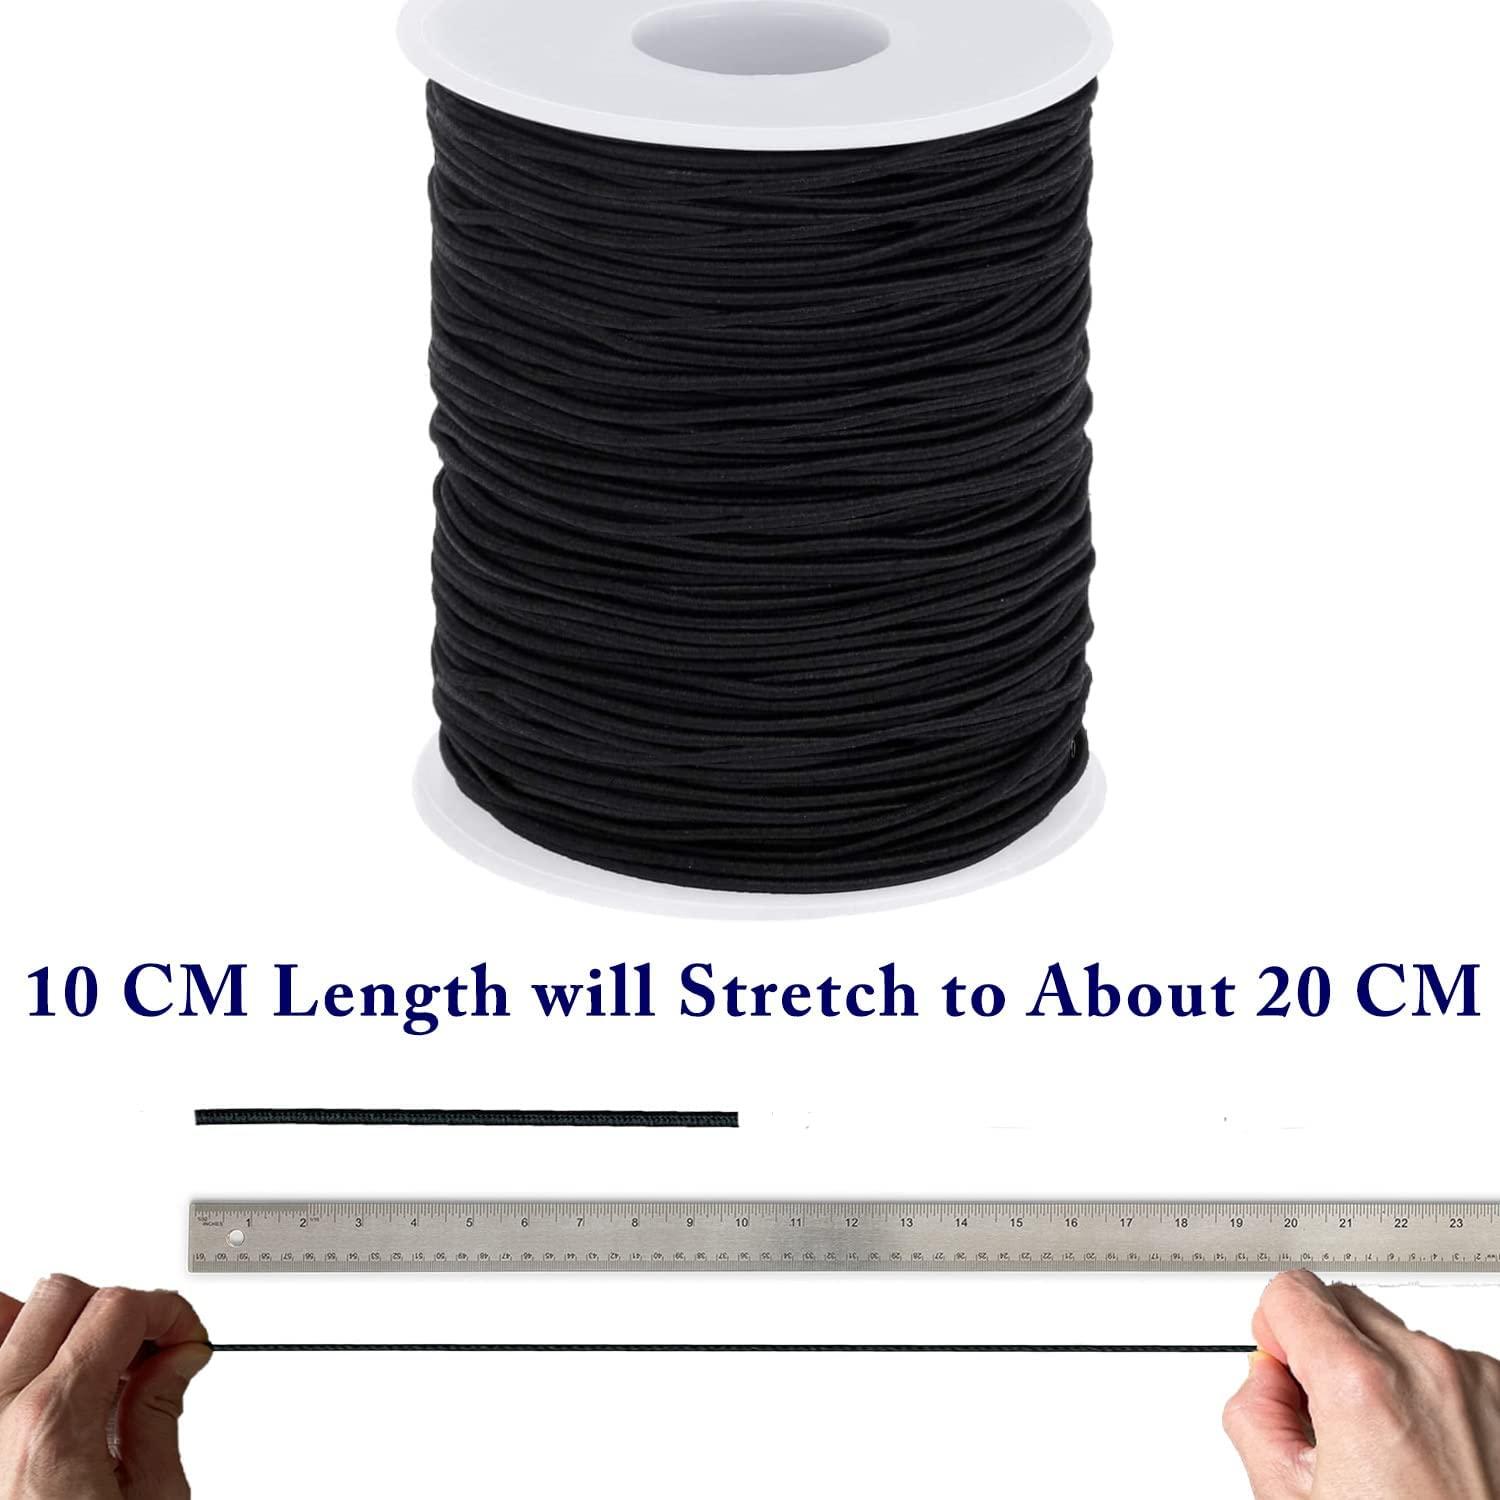 HEMYLU Elastic Cord 1.5MM x 50M, Black Elastic String Bungee Shock Cord  with Nylon Sleeve and Heavy Strength for Crafting DIY Sewing 1.5MM x  55Yards Black